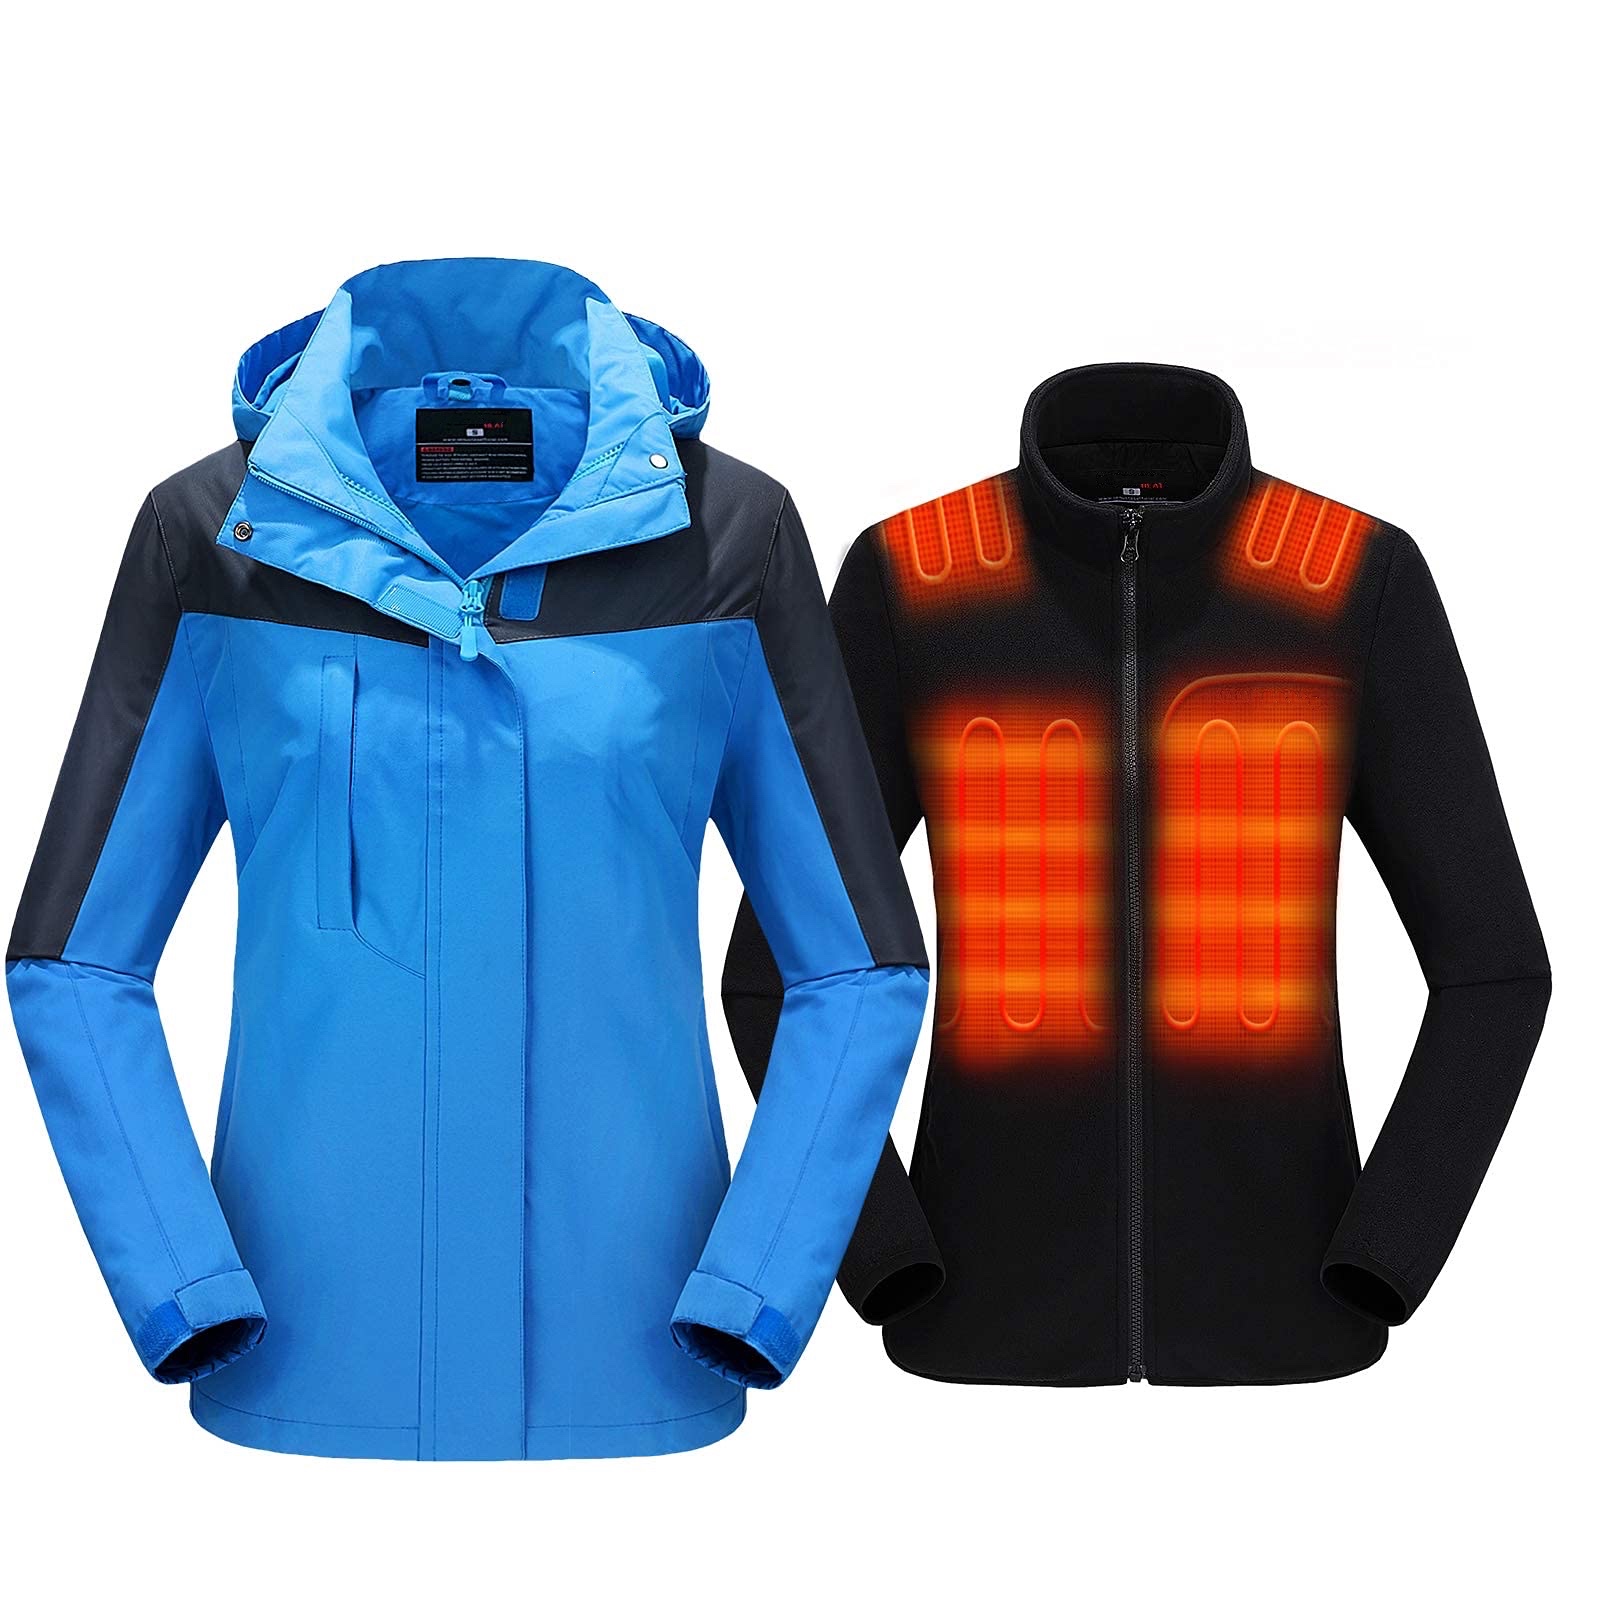 Women's 3-in-1 Heated Jacket with Battery Pack 7.4V